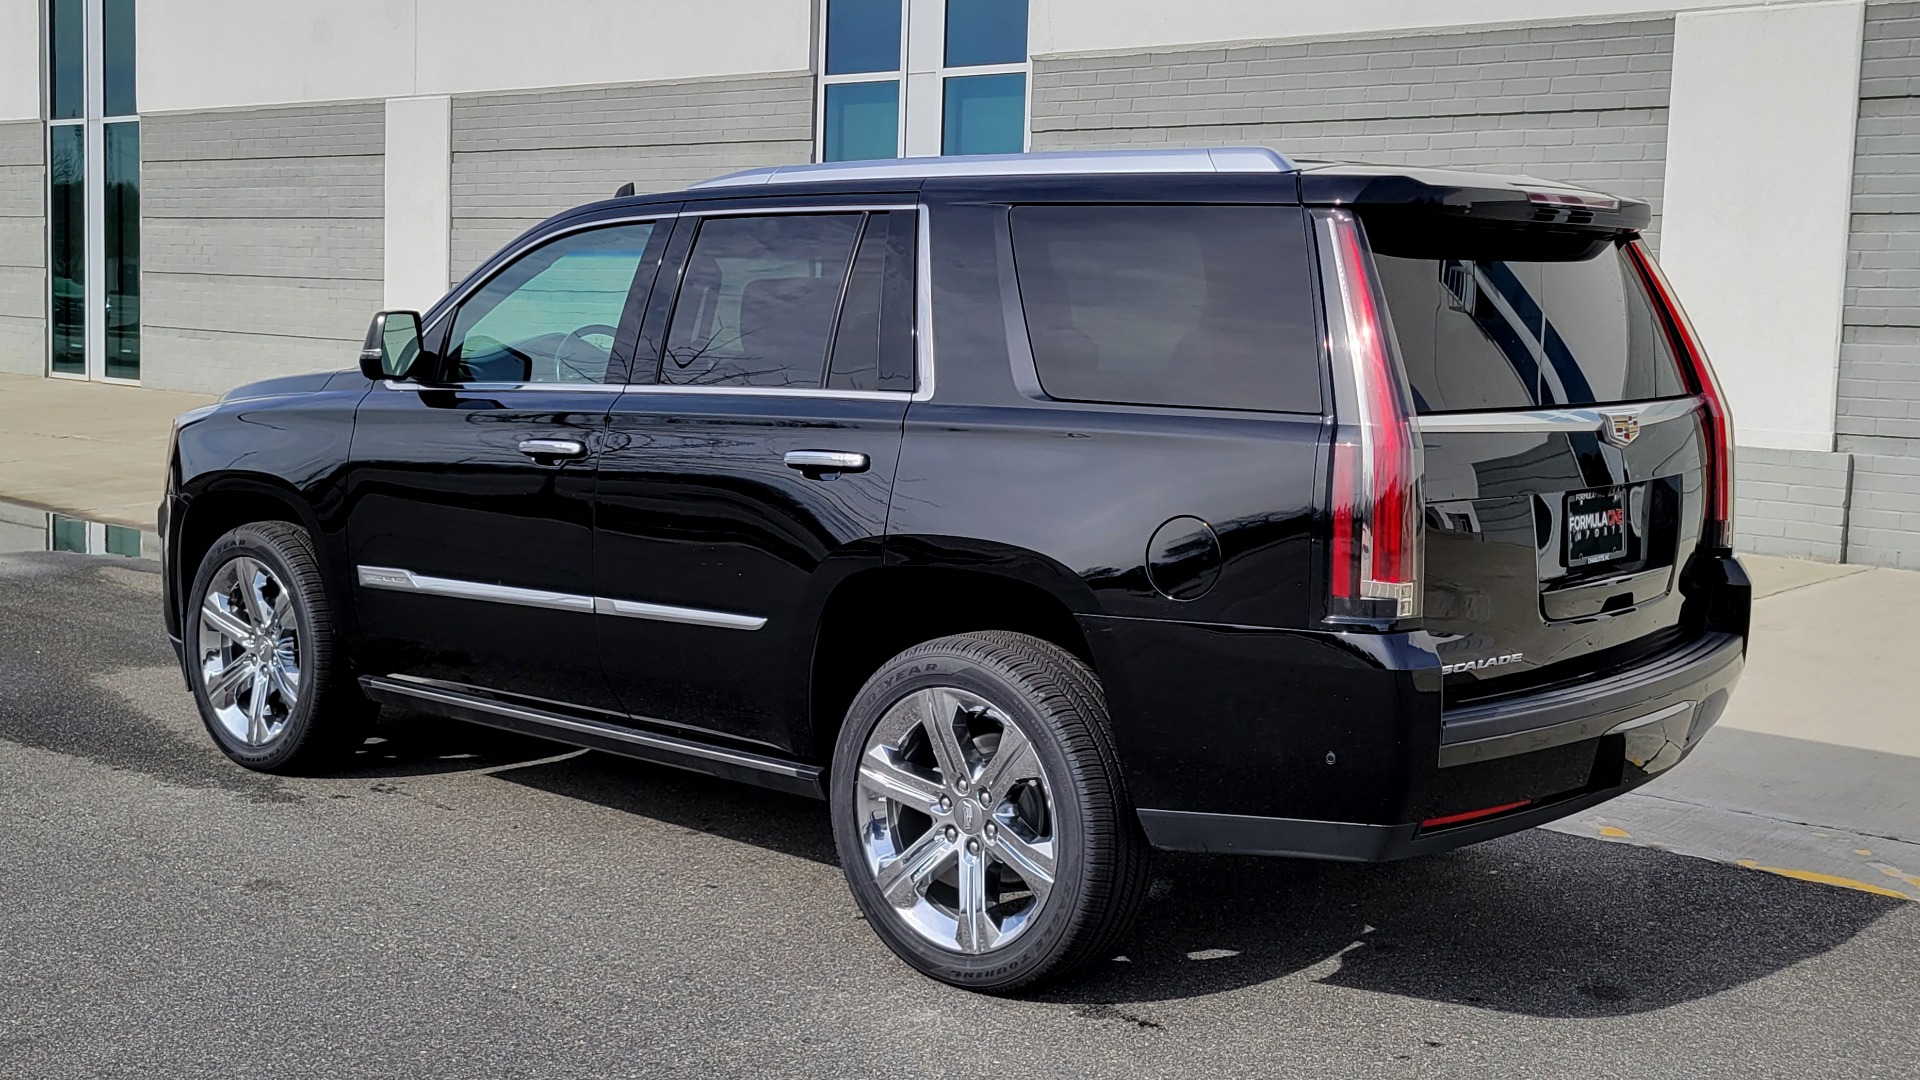 Used 2017 Cadillac ESCALADE PLATINUM 4WD / 6.2L / 8-SPD AUTO / NAV / SUNROOF / DVD / 3-ROW for sale Sold at Formula Imports in Charlotte NC 28227 3